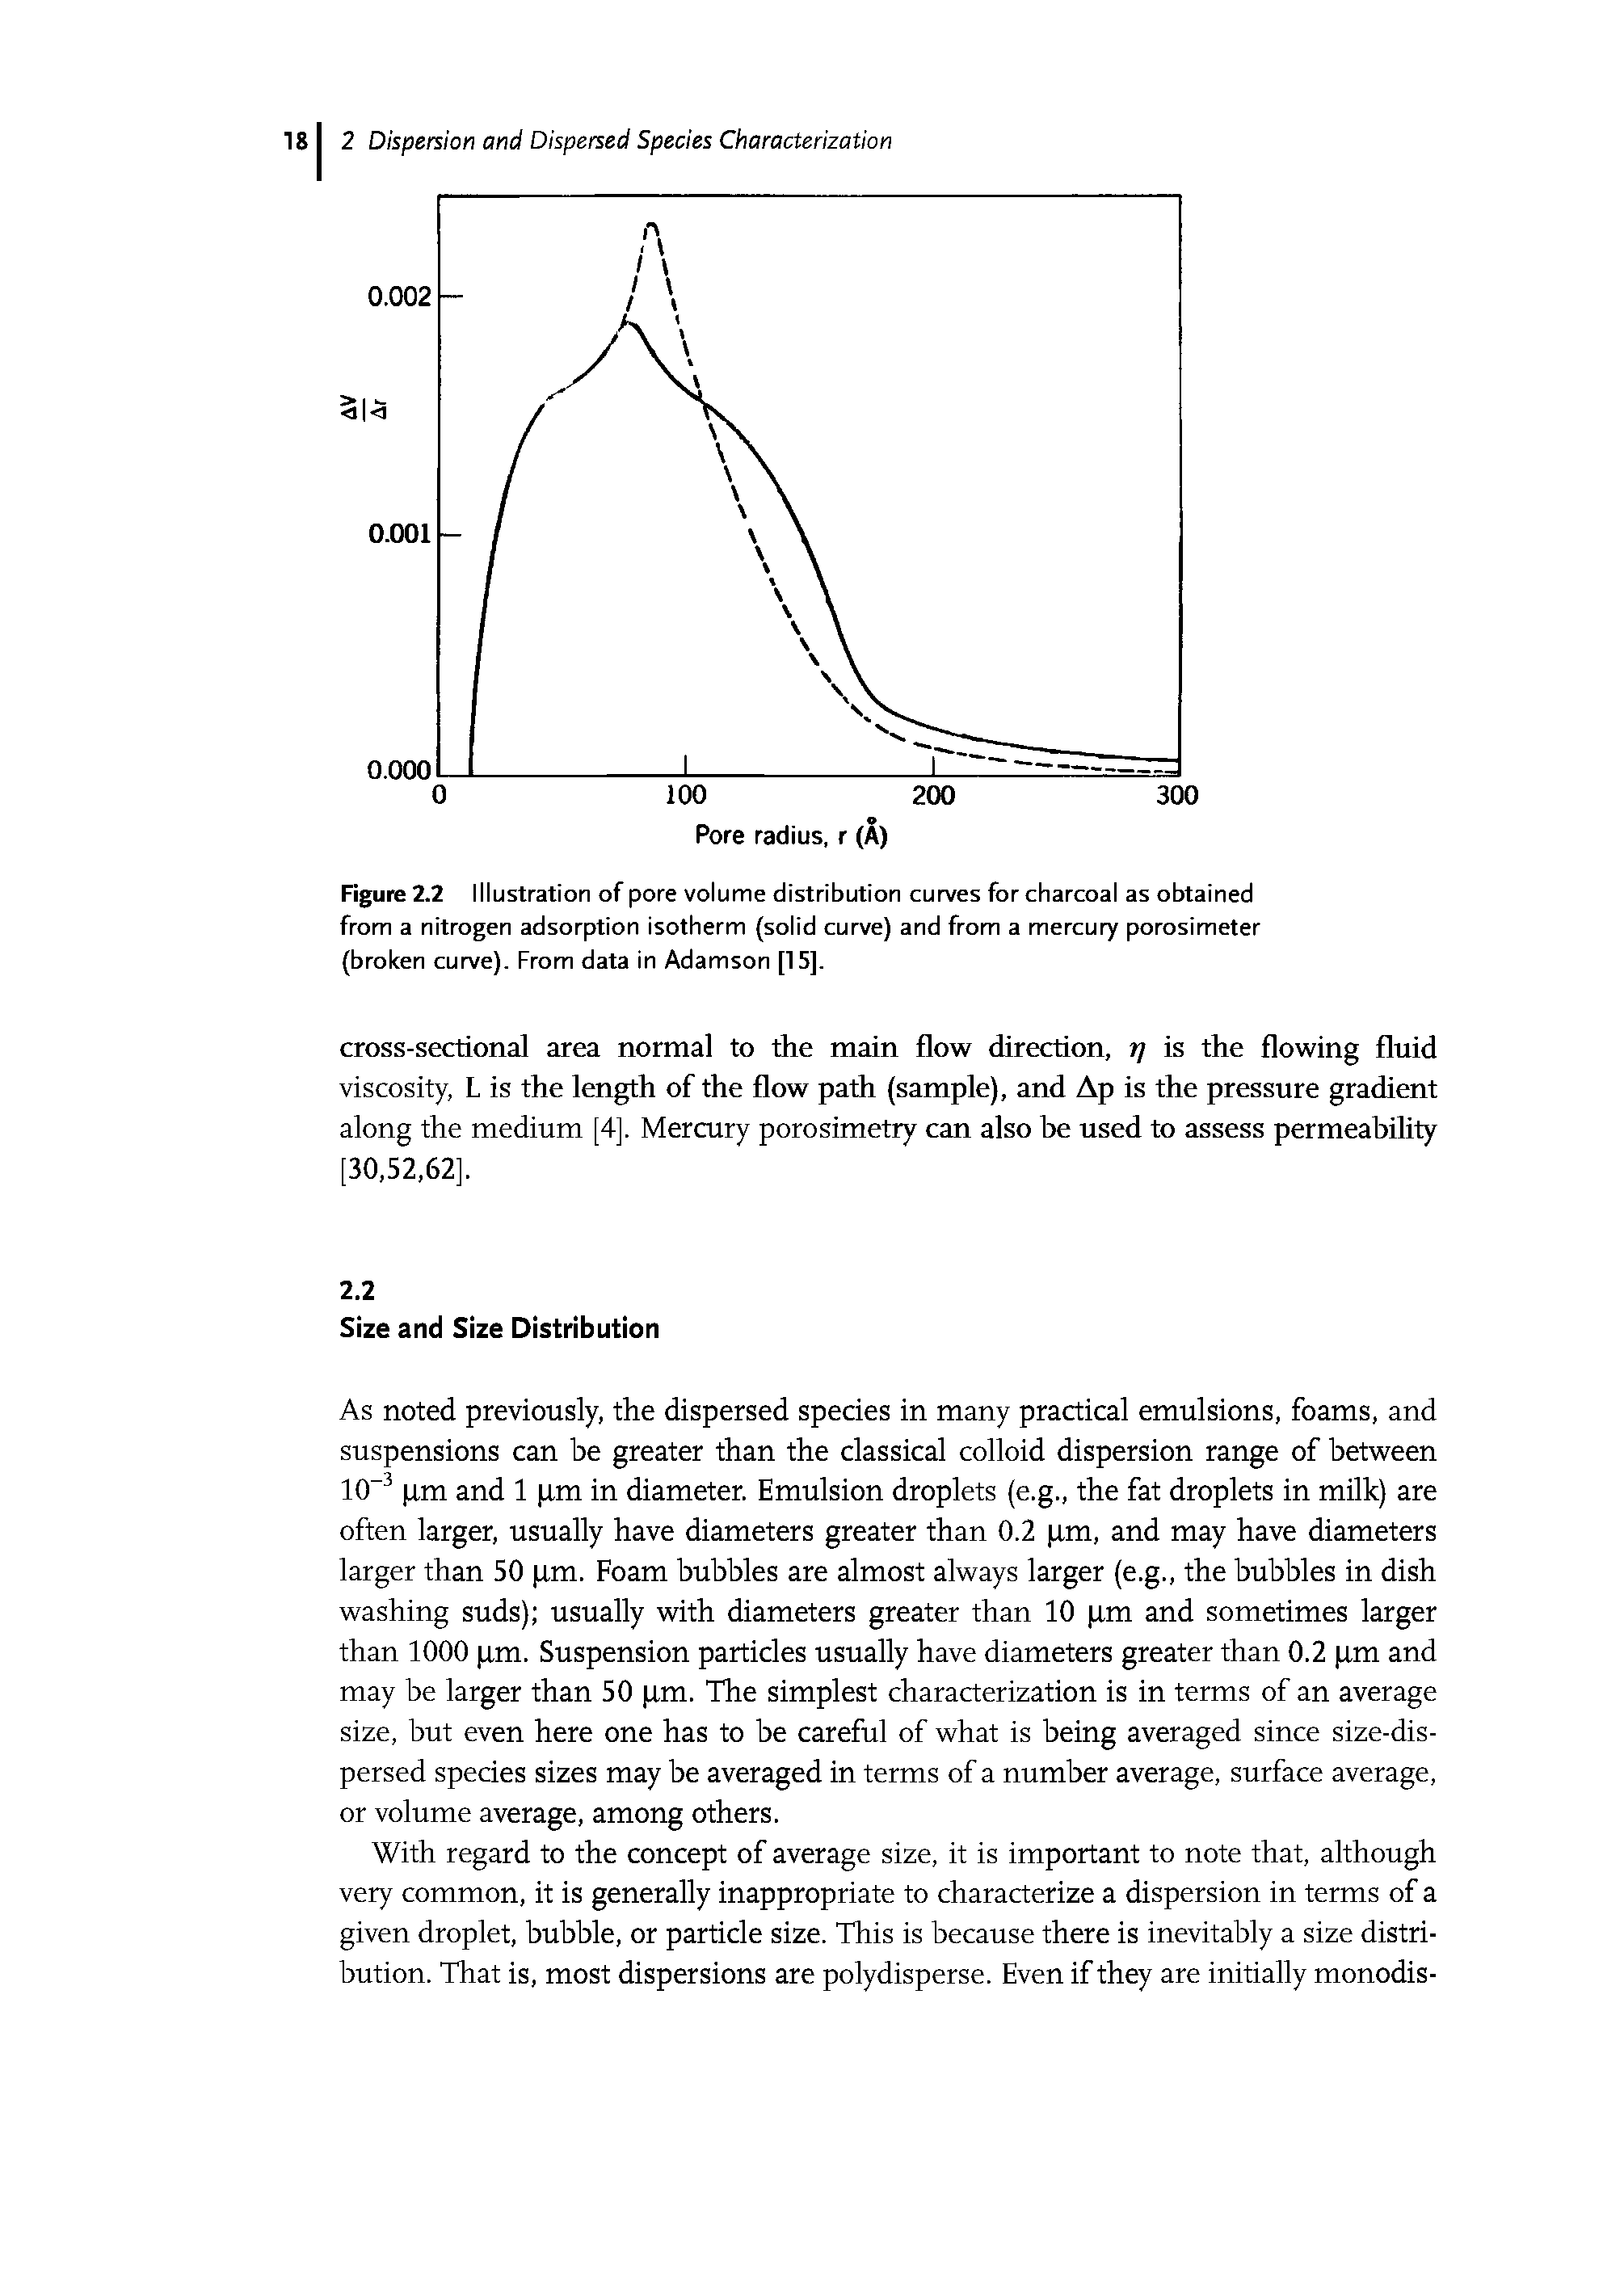 Figure 2.2 Illustration of pore volume distribution curves for charcoal as obtained from a nitrogen adsorption isotherm (solid curve) and from a mercury porosimeter (broken curve). From data in Adamson [15].